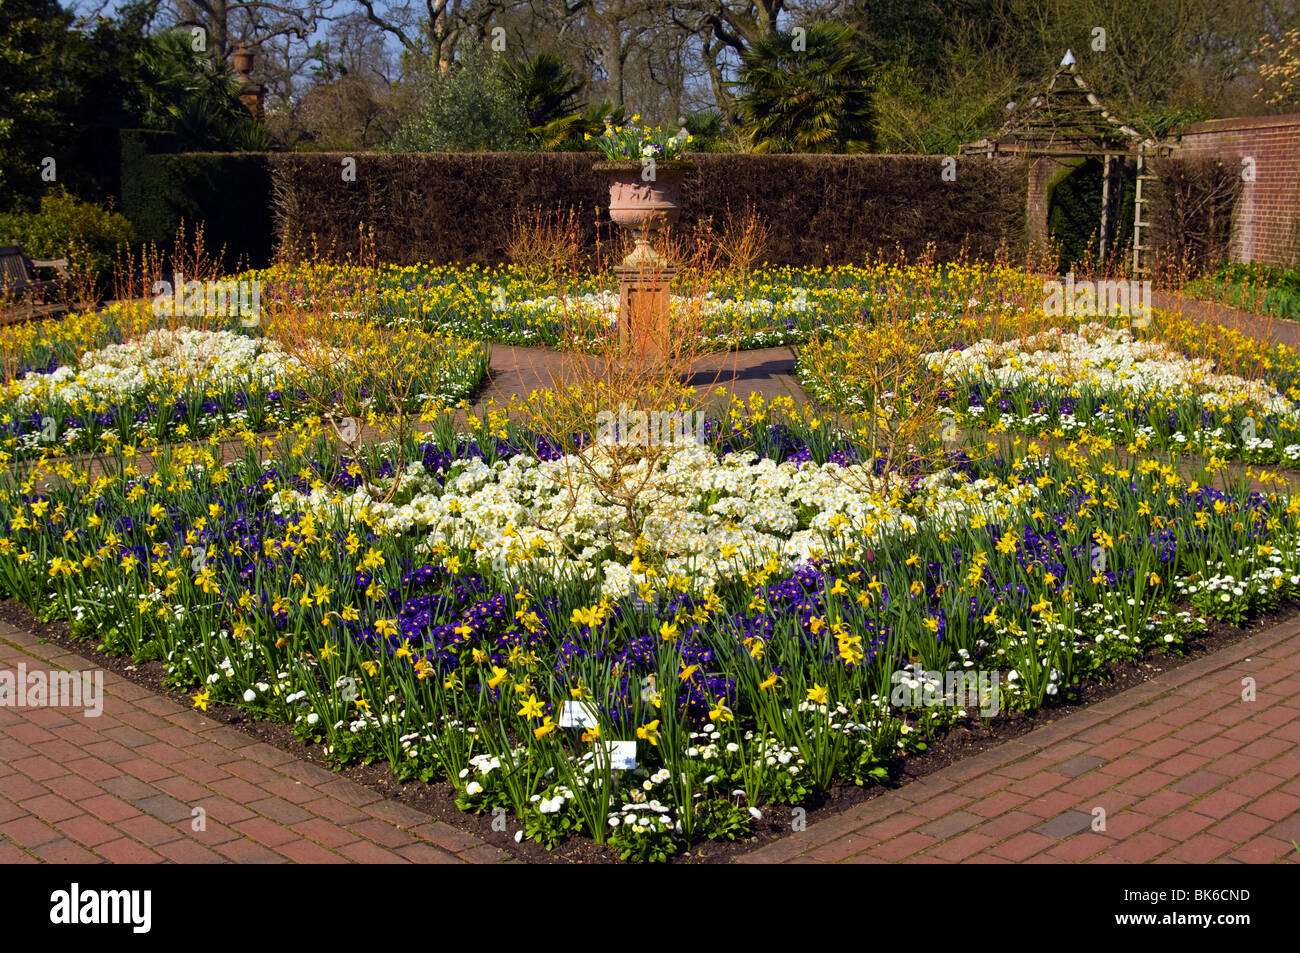 Spring Bedding Flowers and Daffodils In The Walled Garden RHS Wisley Surrey England Stock Photo